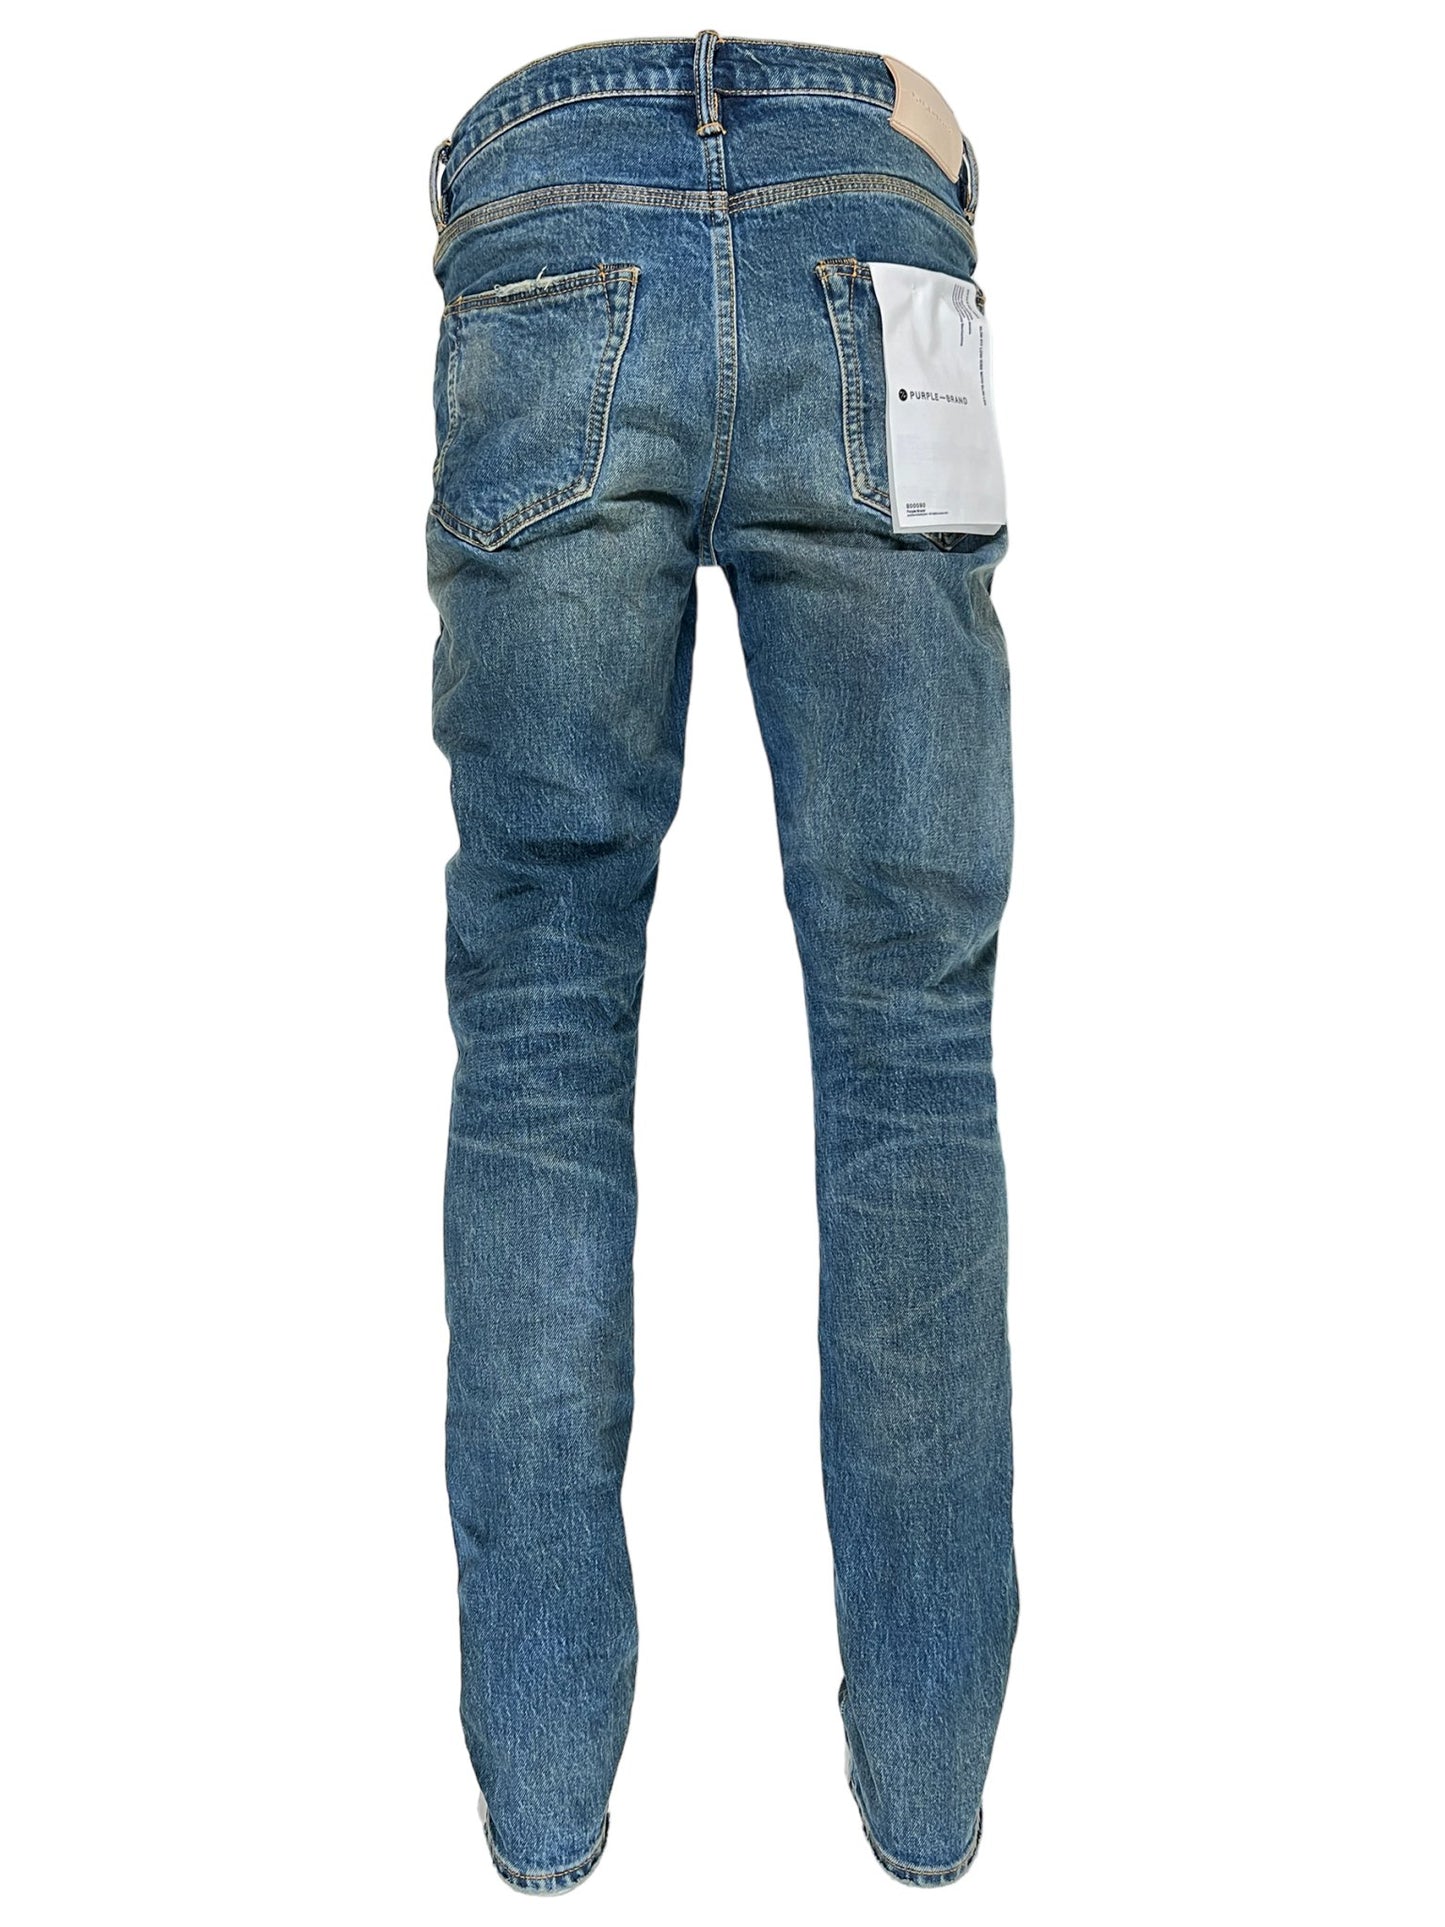 The back view of a pair of Purple Brand P001-DPMI Dirty Patina DK Indigo jeans.